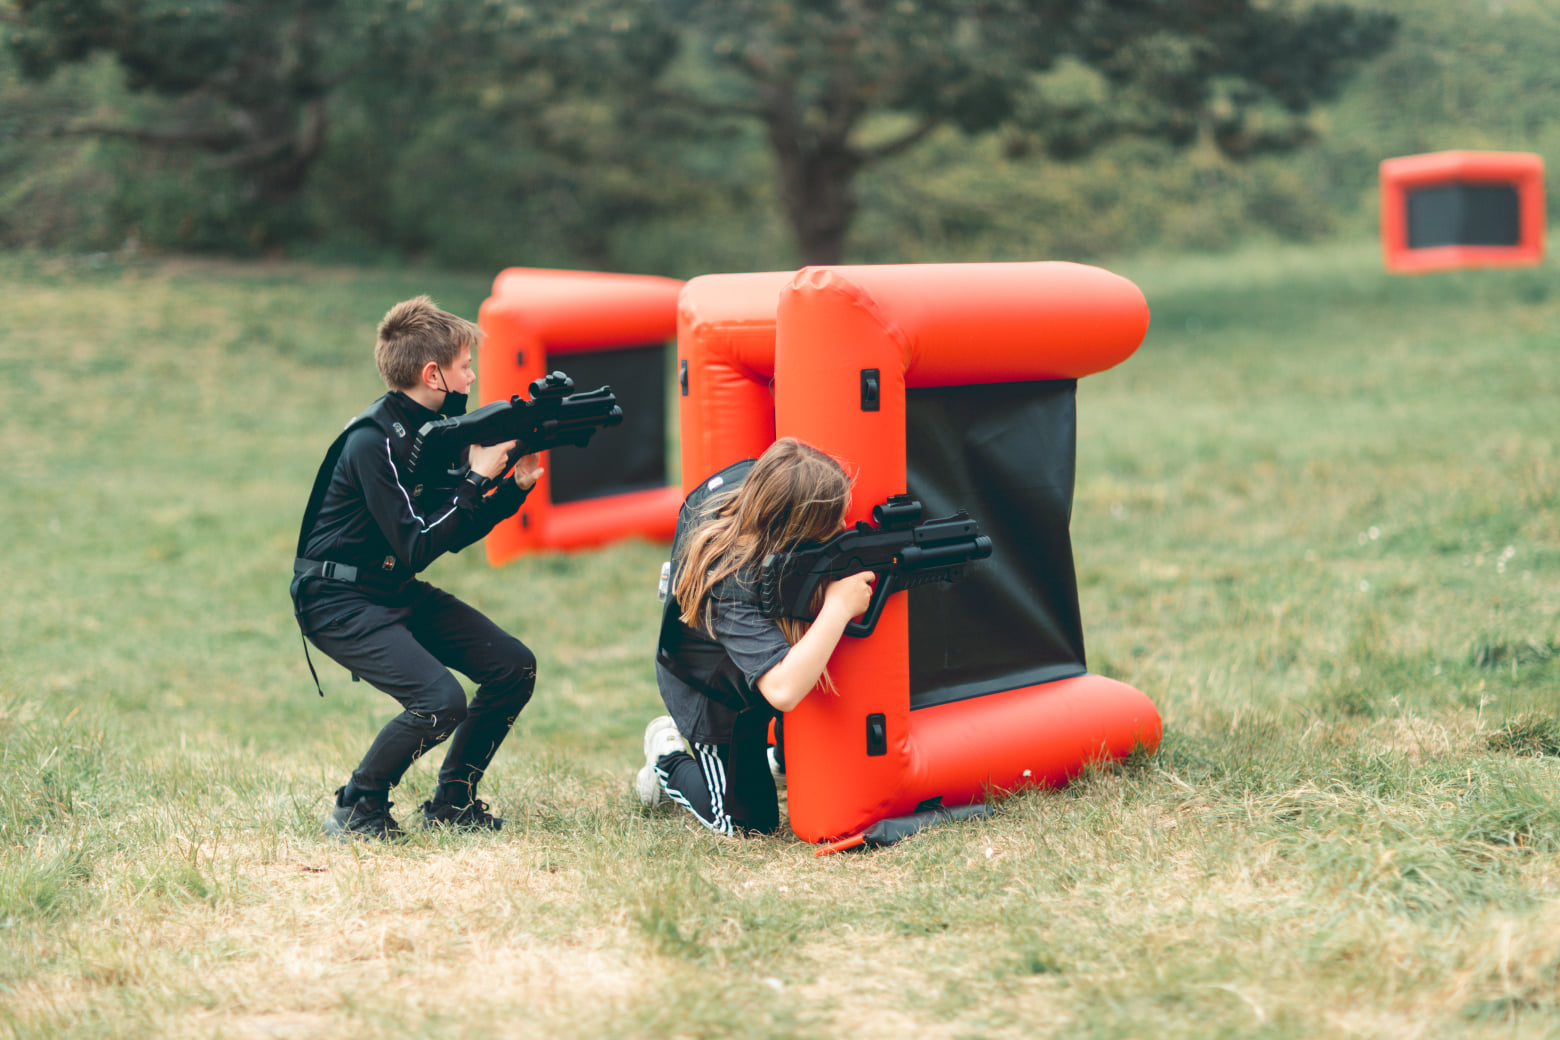 Laser tag: Ukrainian high-tech solutions that unite people in teams around the world